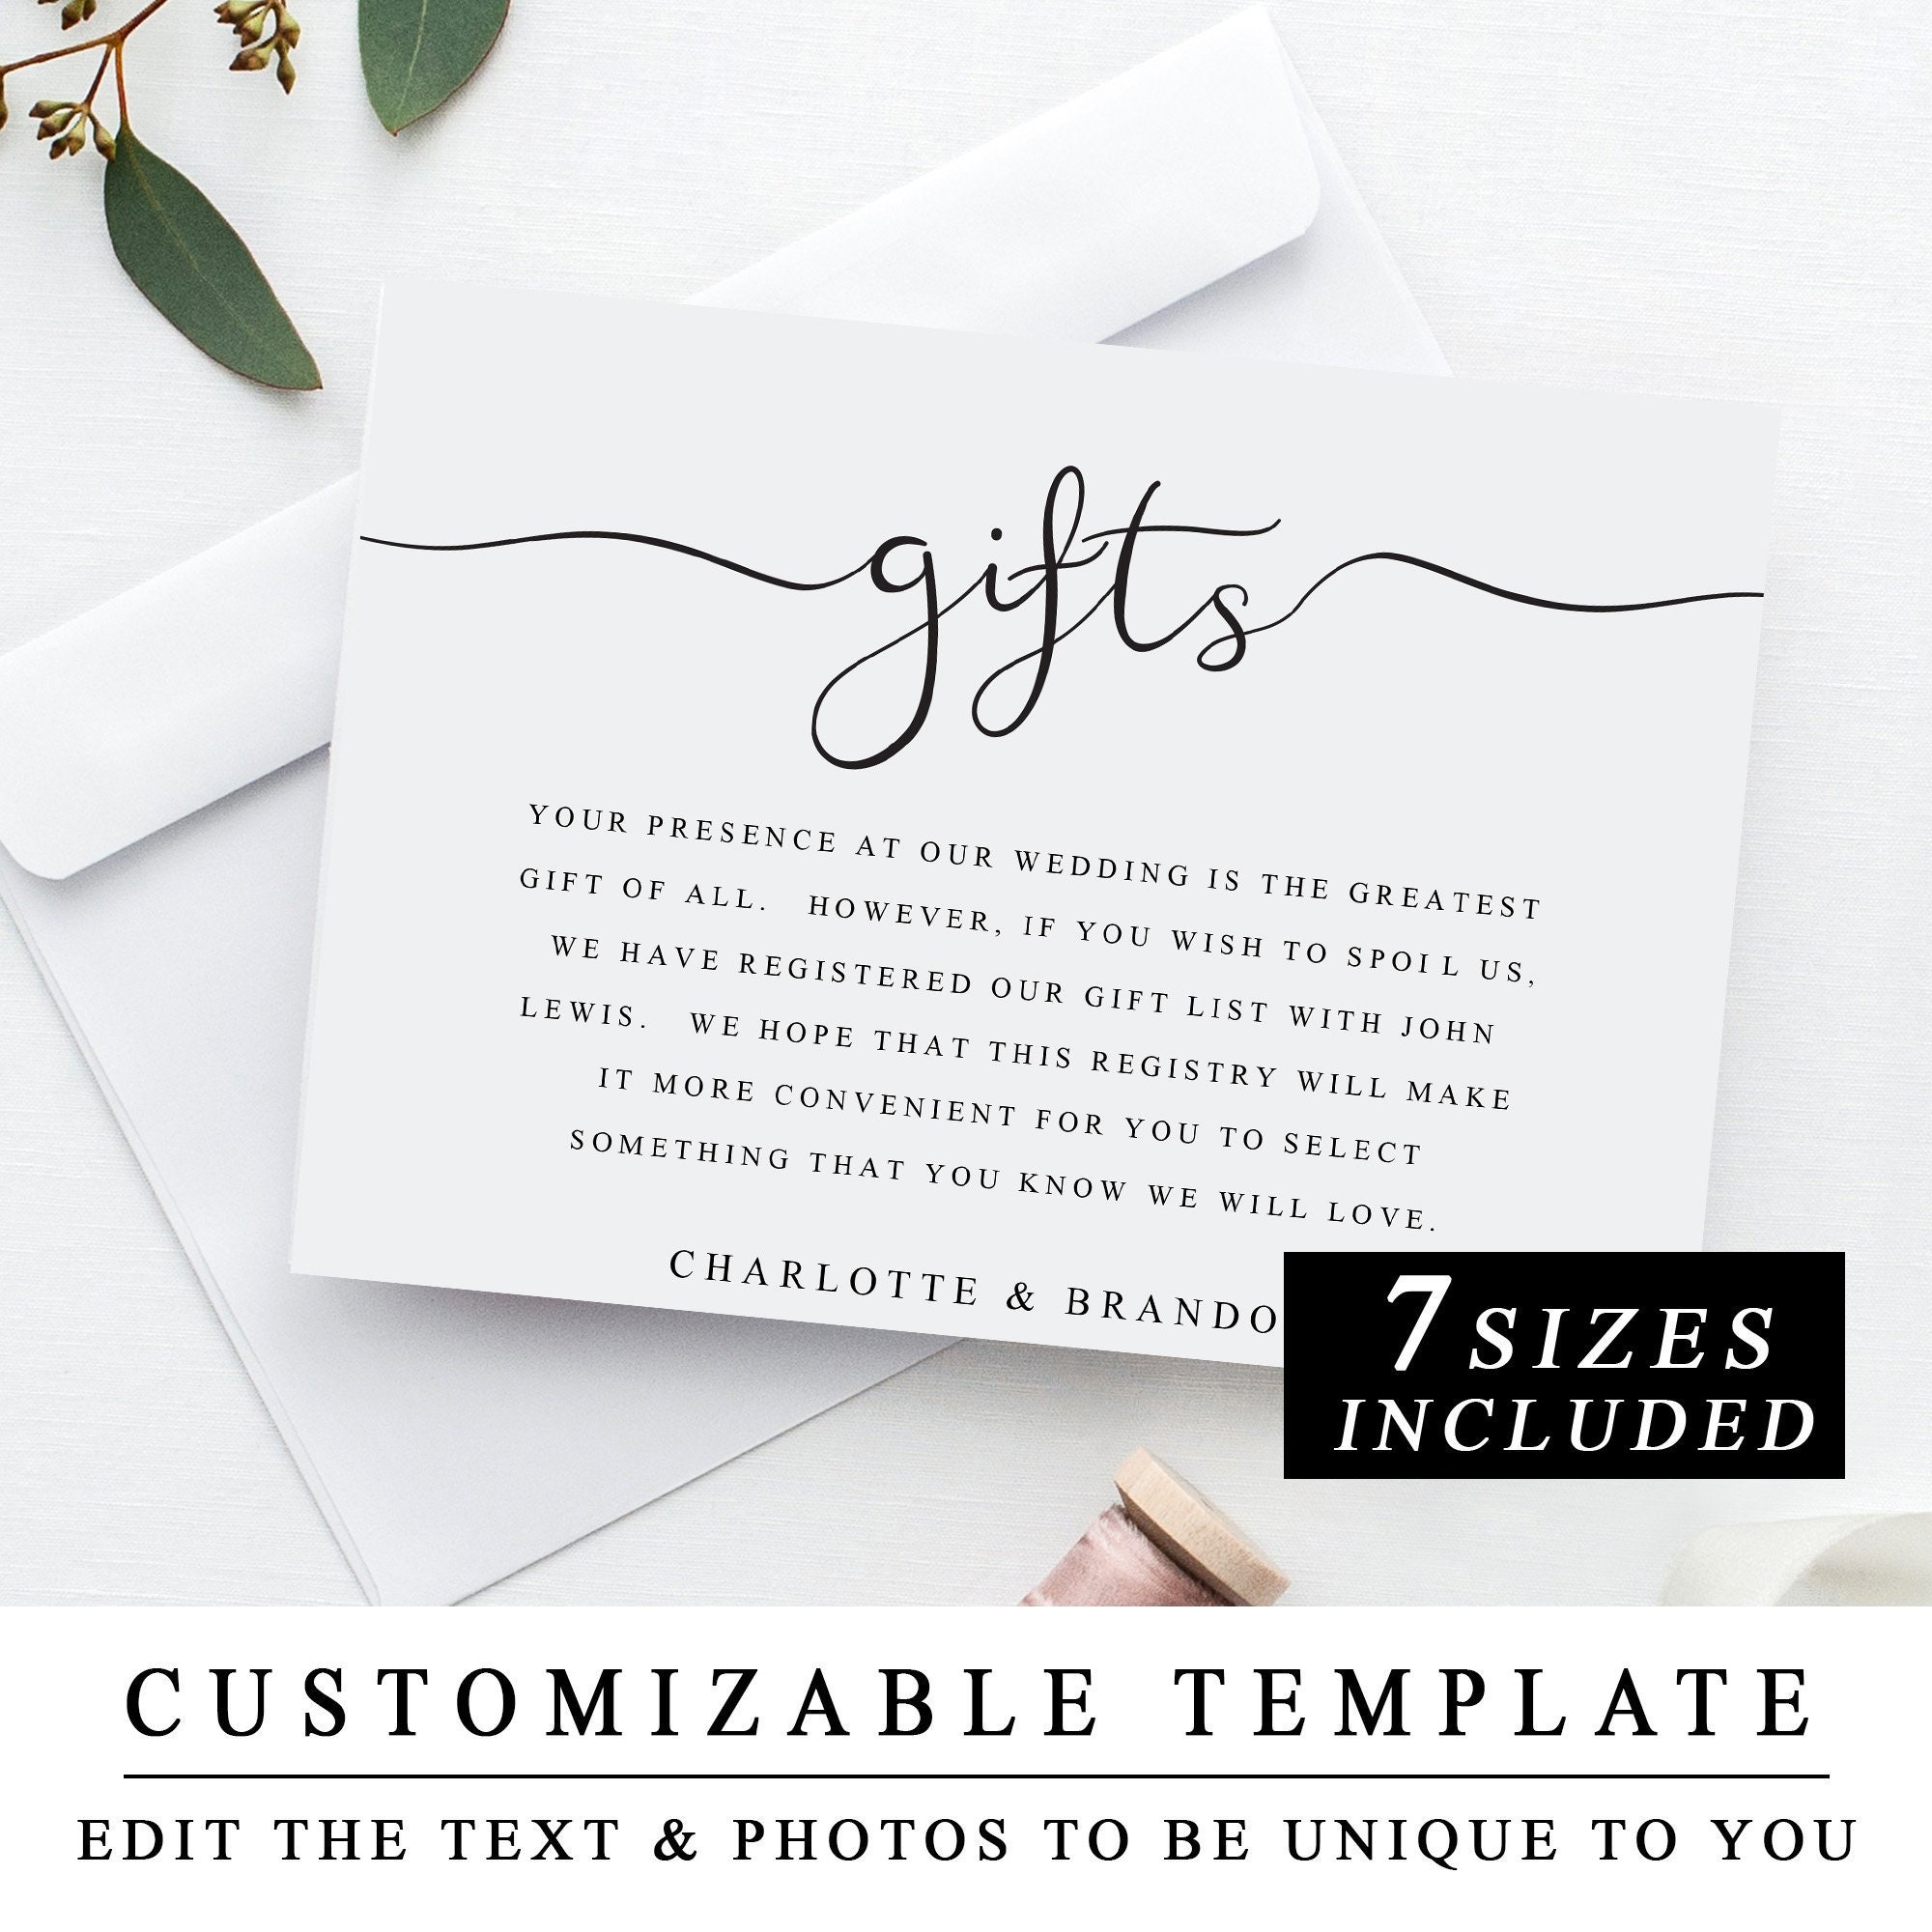 Wedding Gift List Wording Examples  How To Ask Graciously